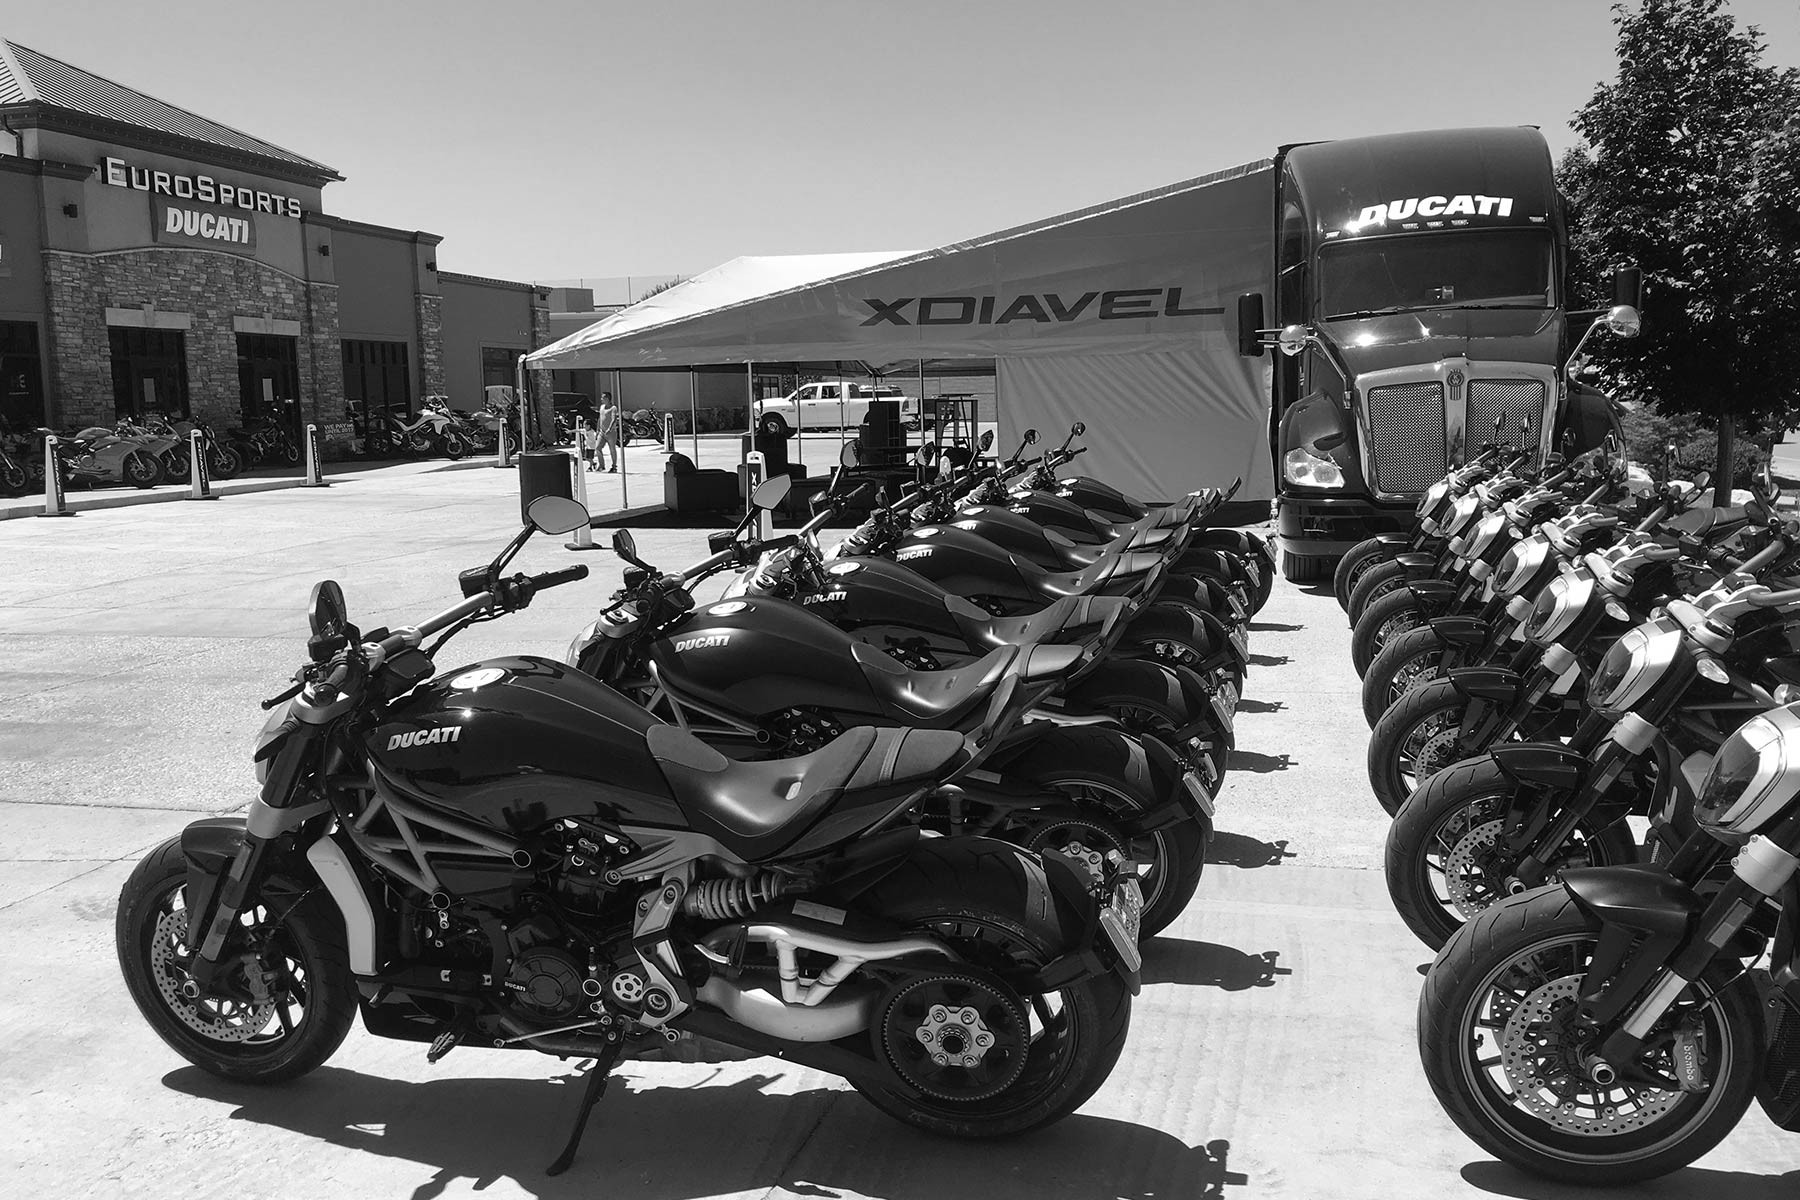 XDiavel trailer and expanded tent branding